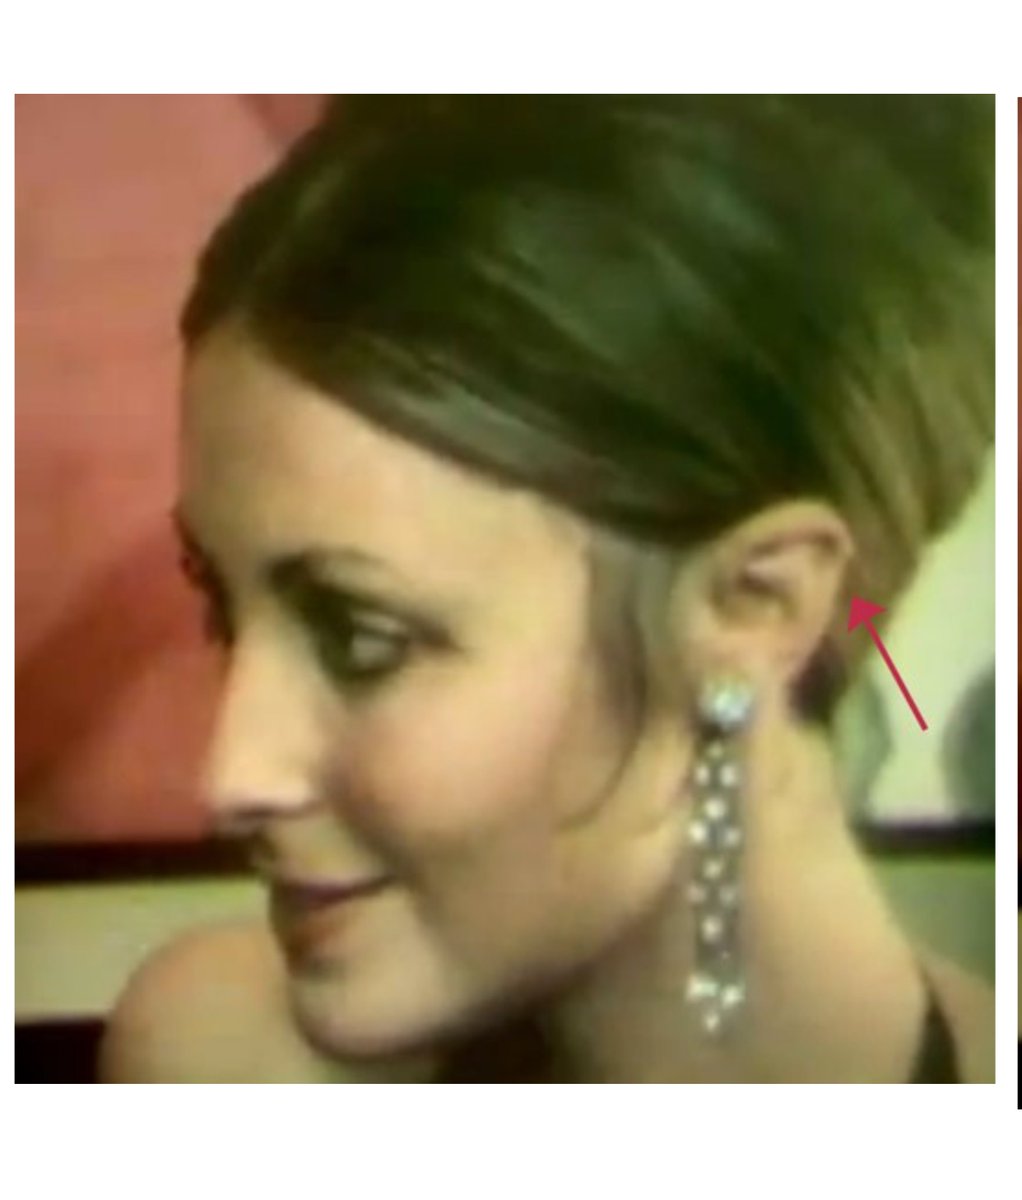 15 of 25Here are photos of Sharon Tate’s ear, which we just caught “Pati” wearing during the 25th anniversary interview.Pati is SHARON! We are told 6 years after this interview “Pati” dies of cancer. Did someone catch-on via the ear slip sending “Pati” (Sharon) into hiding?